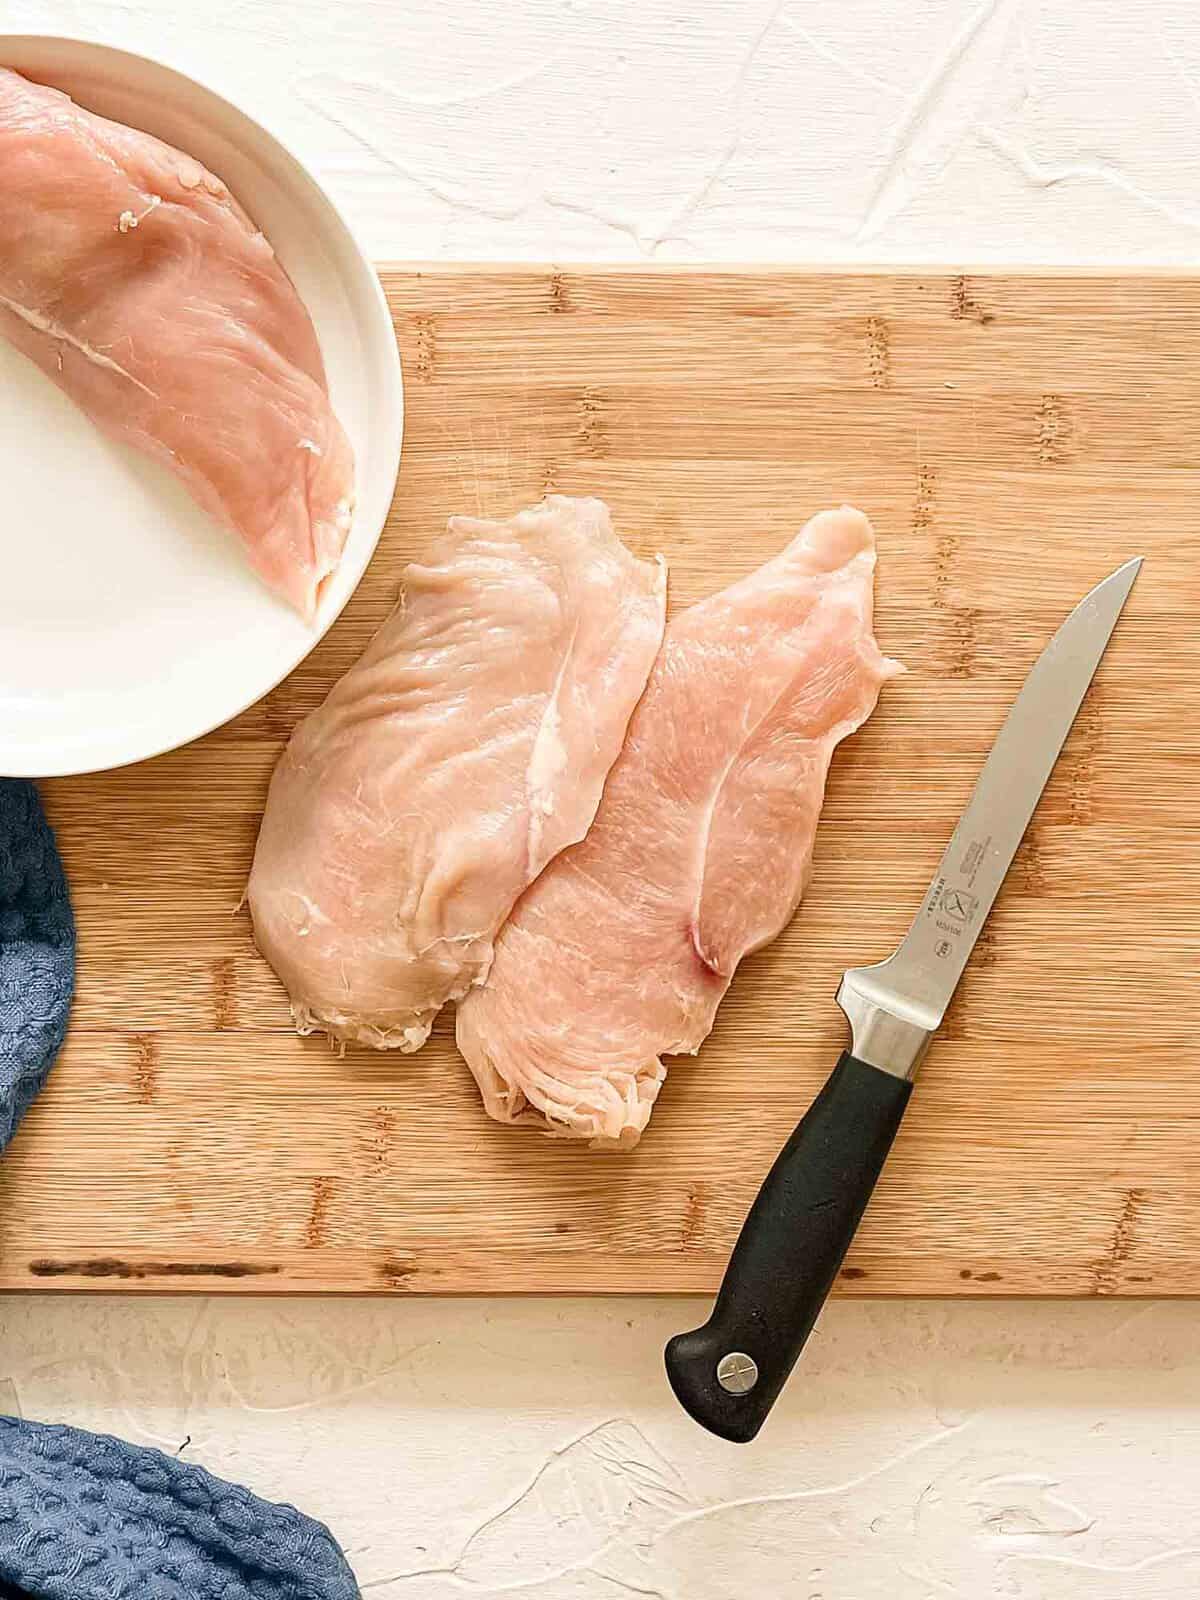 Raw chicken breast on cutting board with knife having been sliced in half lengthwise